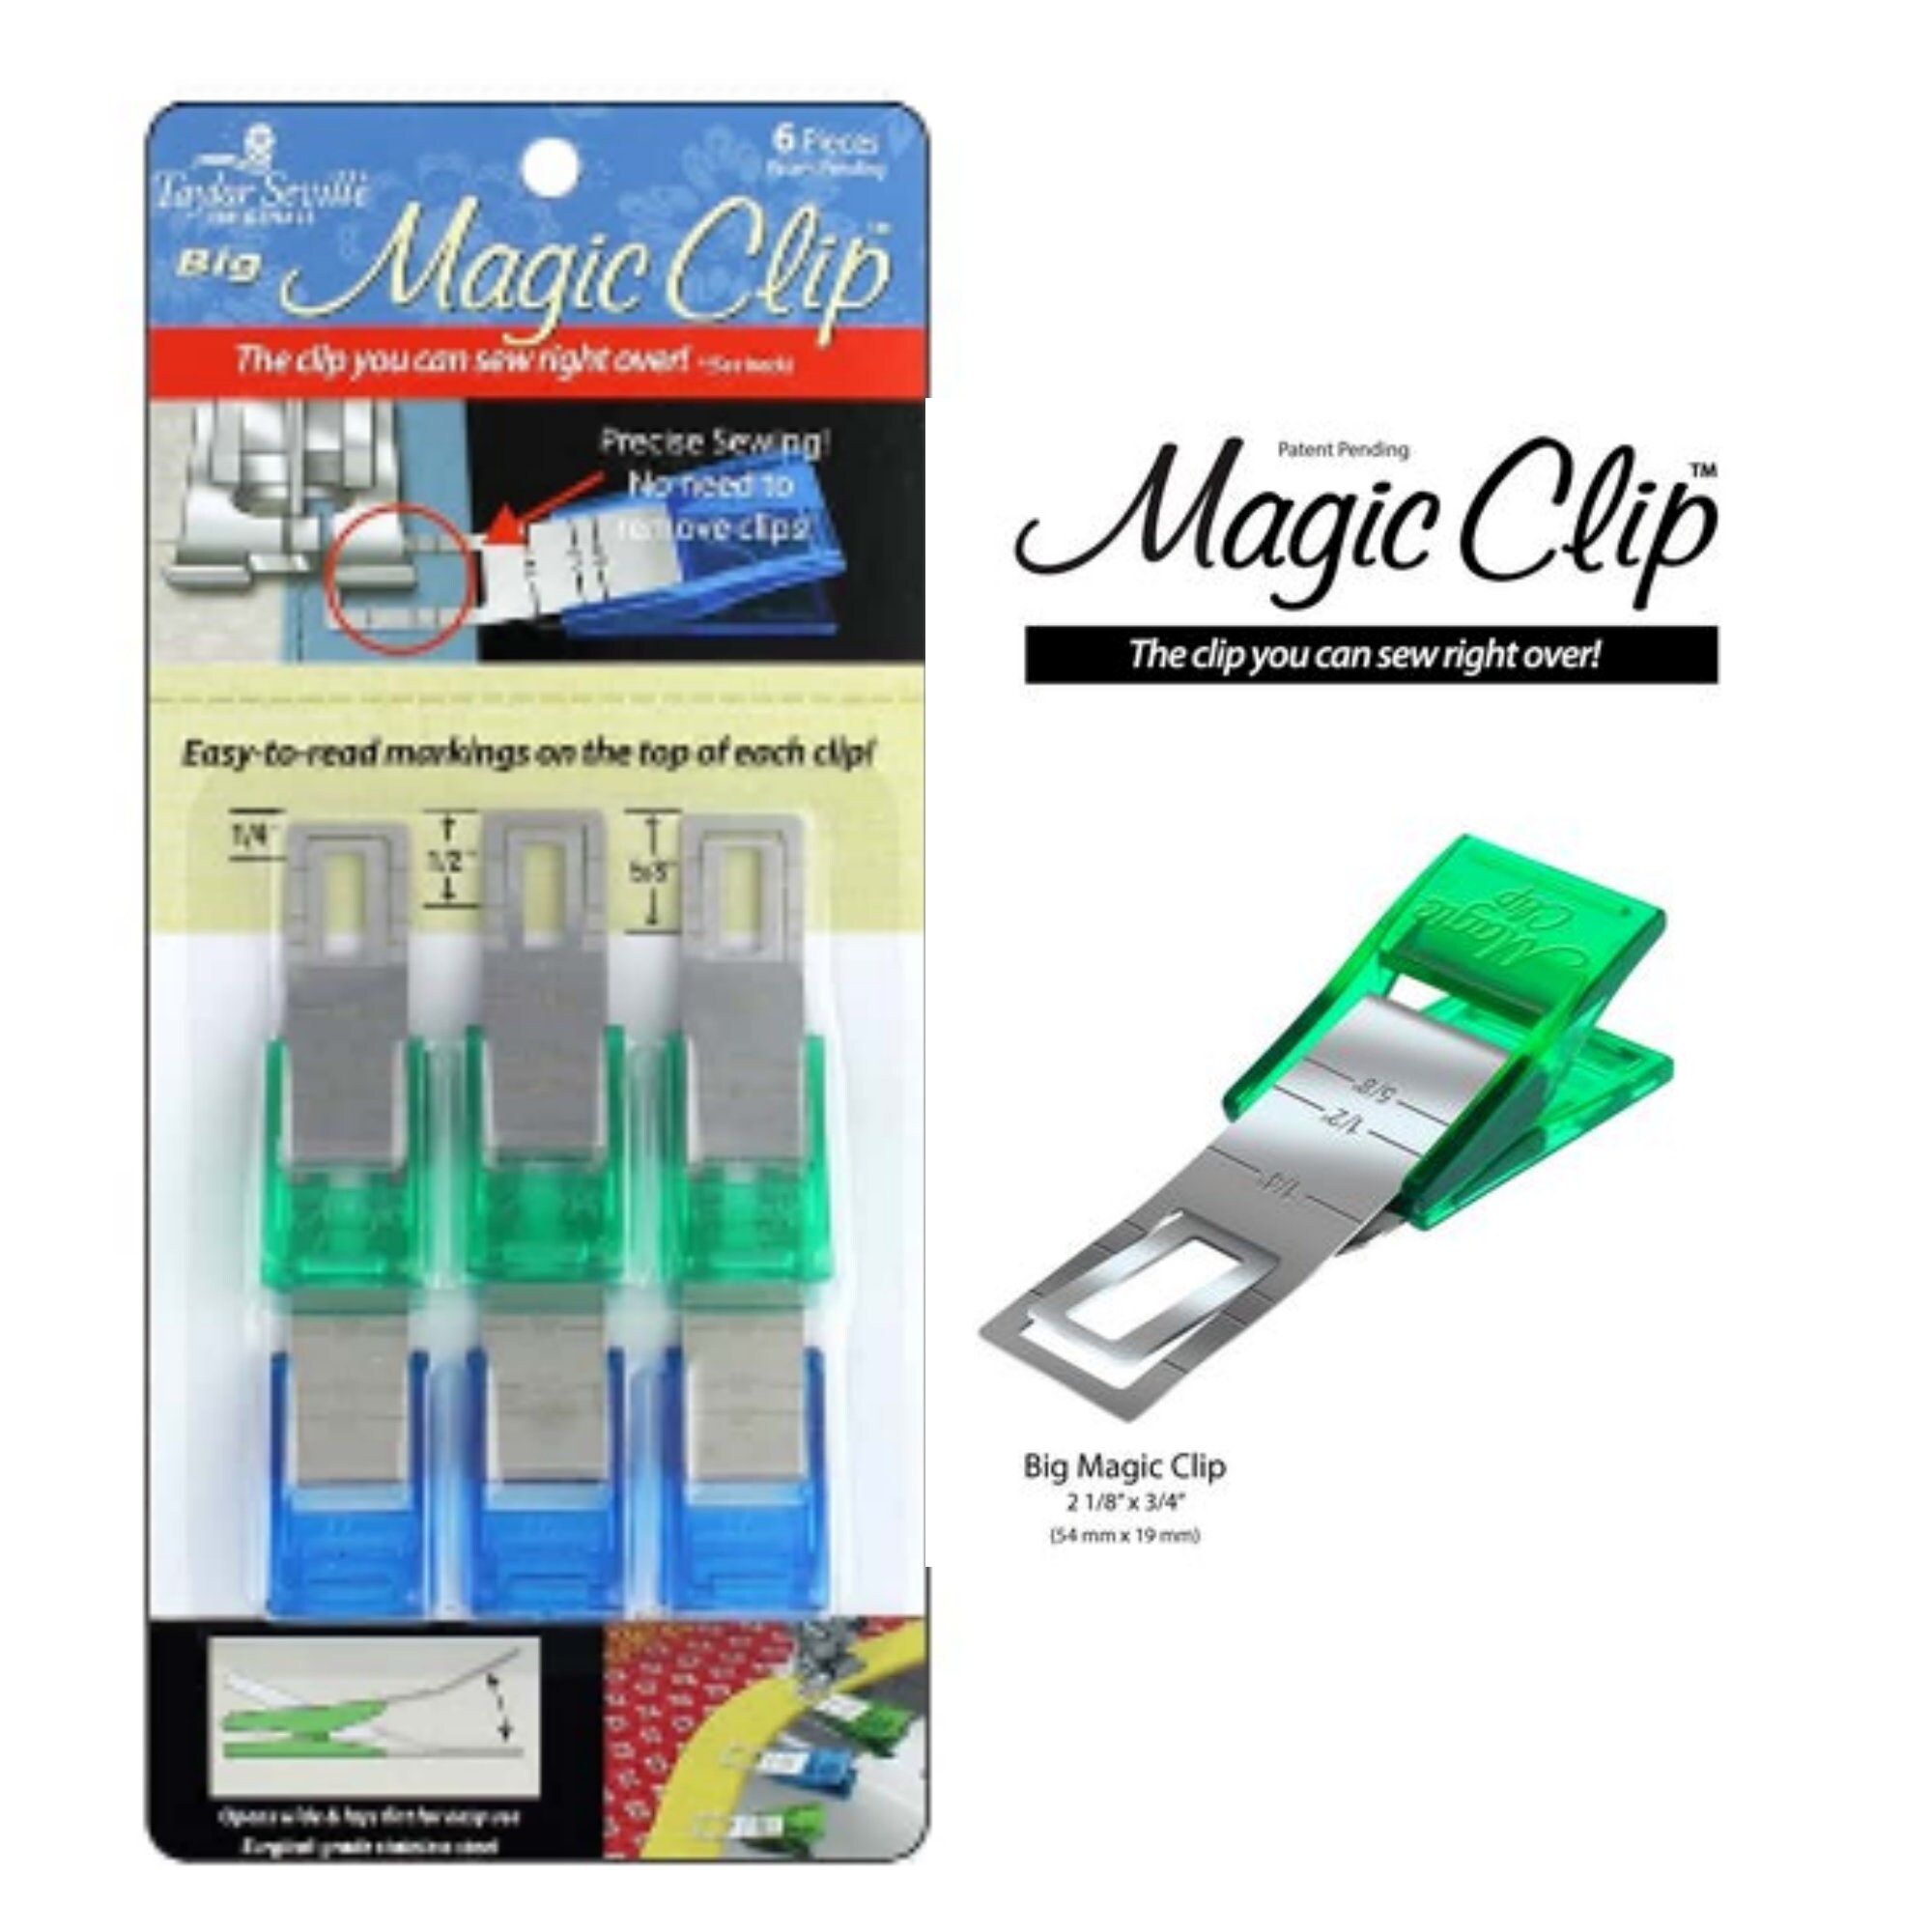 Discover the Magic Of Taylor Seville Originals Sewing Magic Clips